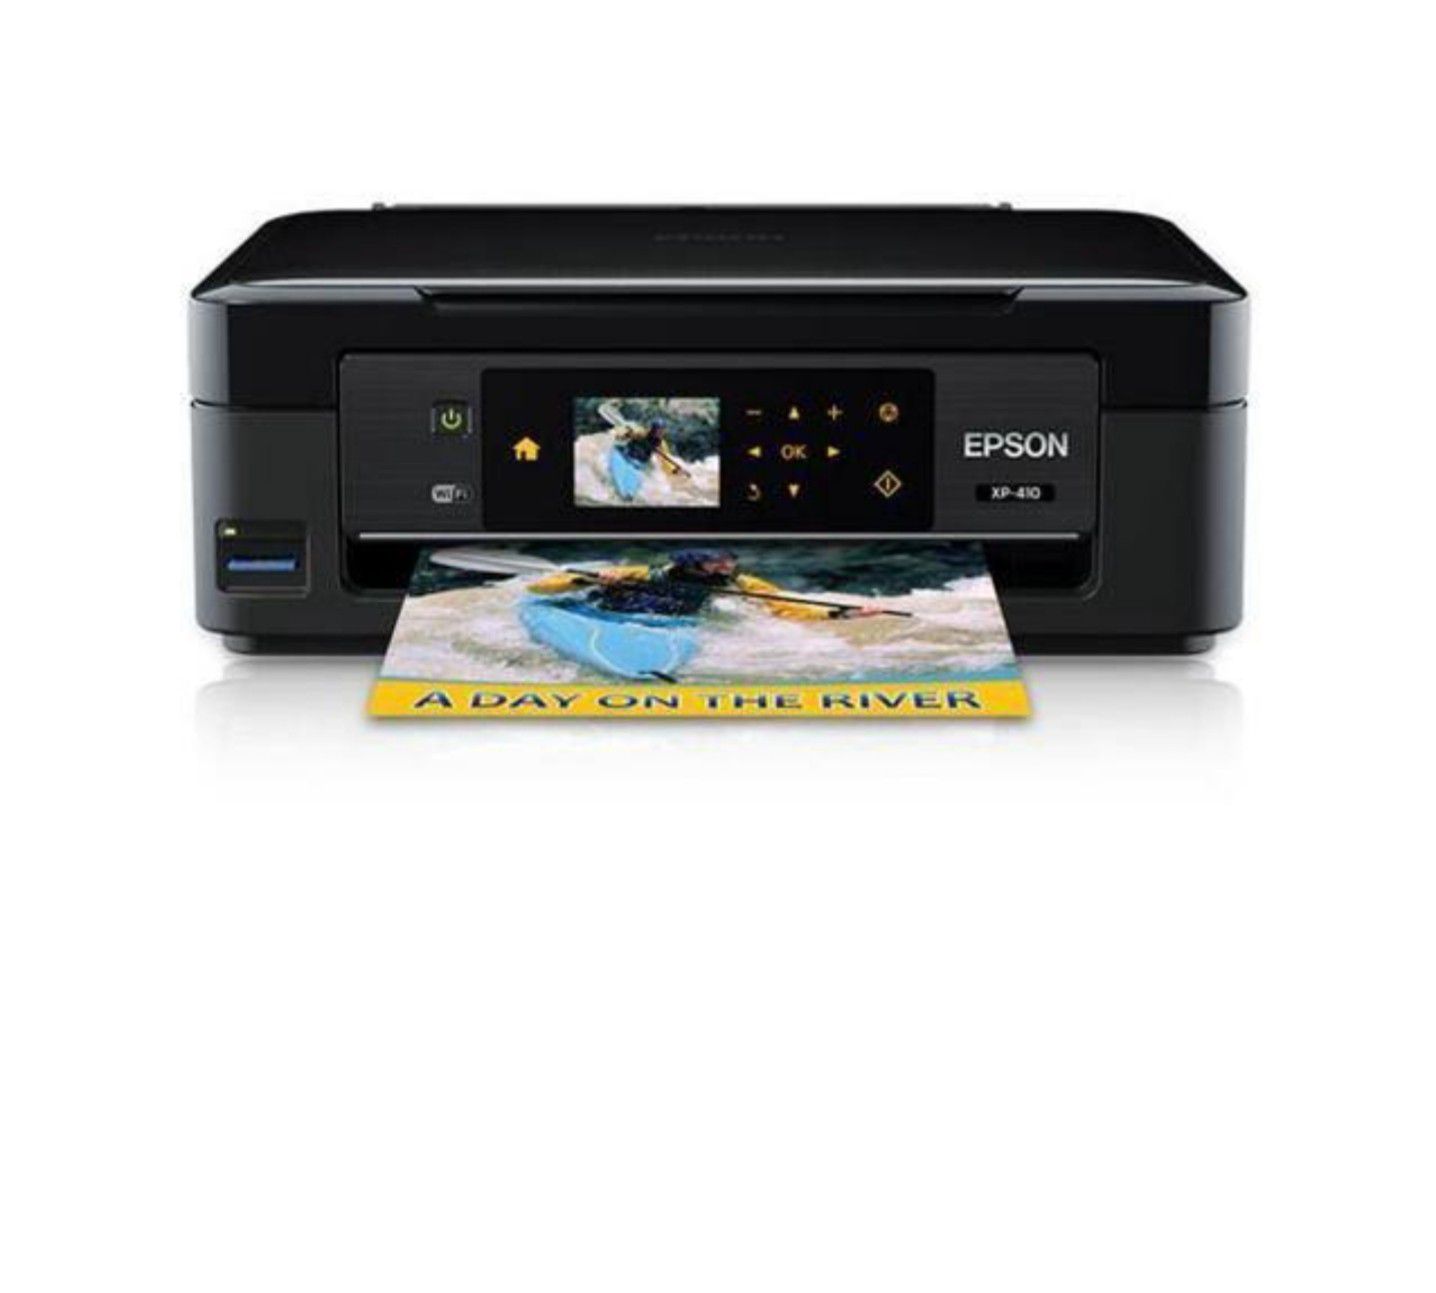 Epson expression home XP-410.